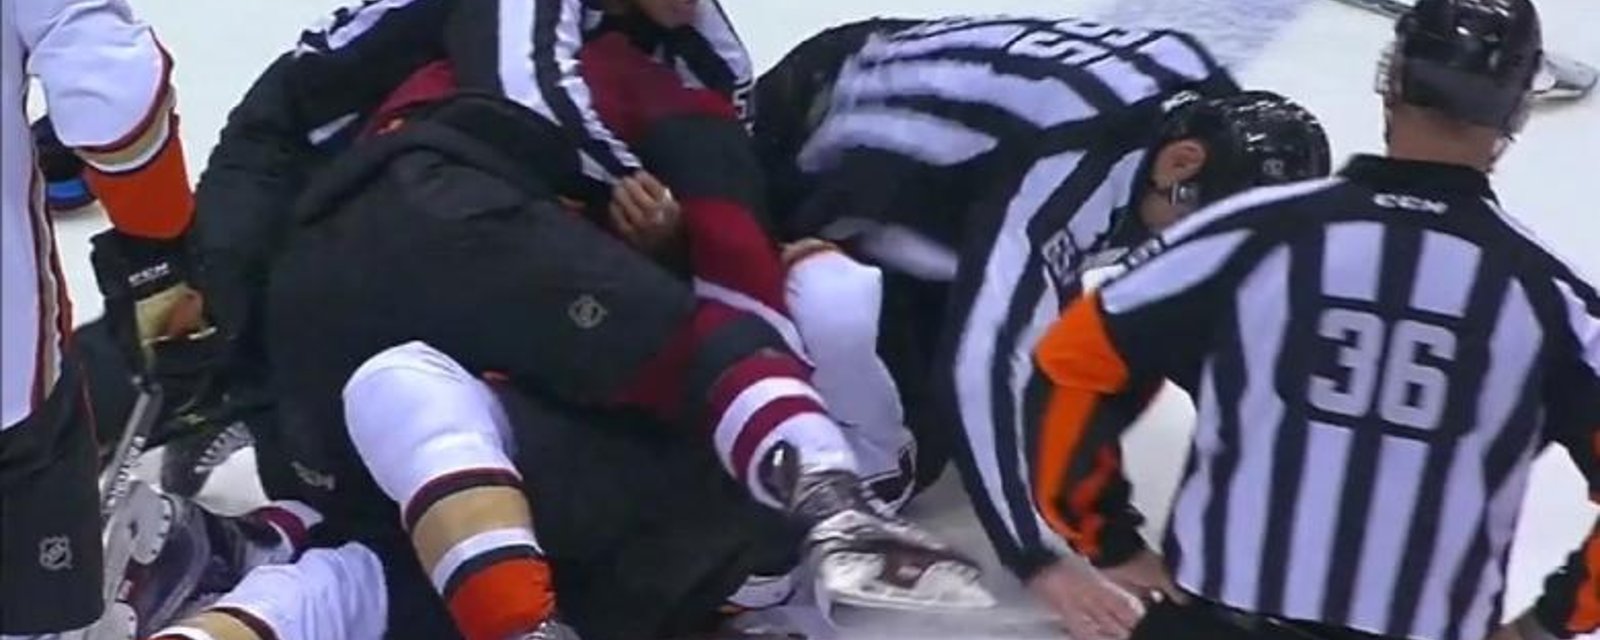 Ryan Garbutt delivers a big hit, gets instantly mauled by rookie.